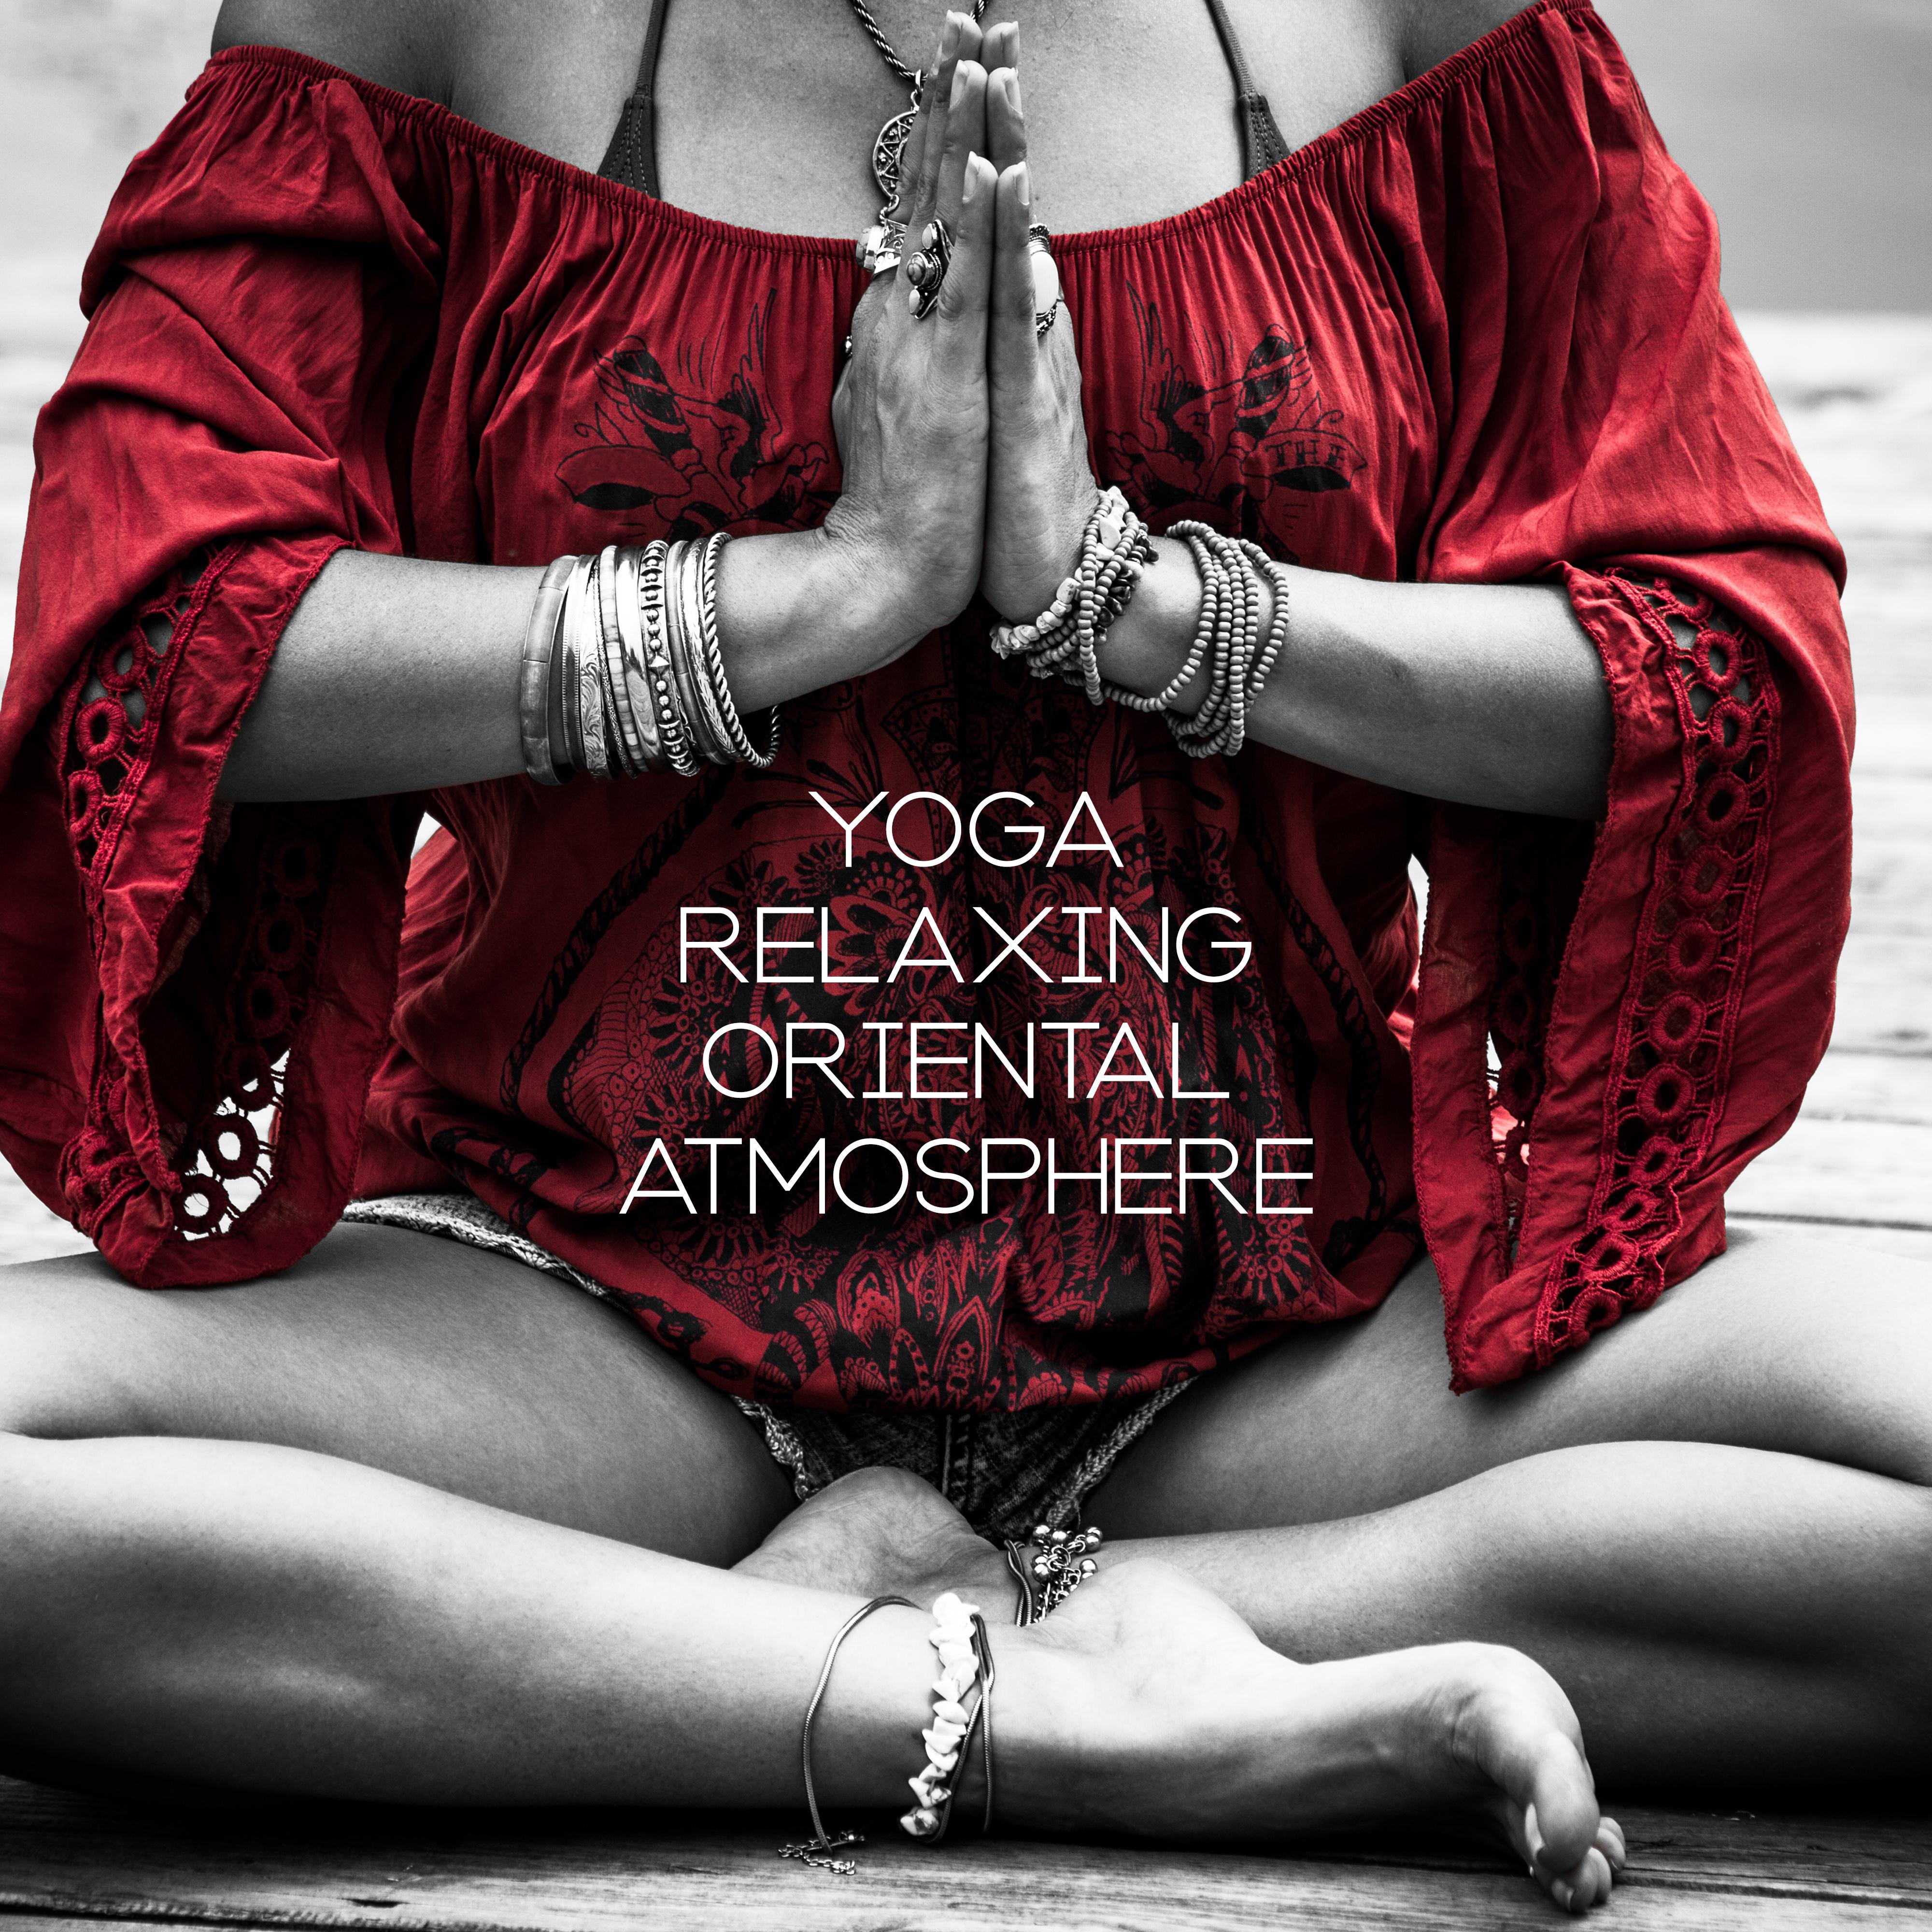 Yoga Relaxing Oriental Atmosphere – New Age 2019 Music Selection for Meditation & Relaxation, Asian Sounds, Soothing Melodies, Mantra Zen, Renew Your Inner Energy